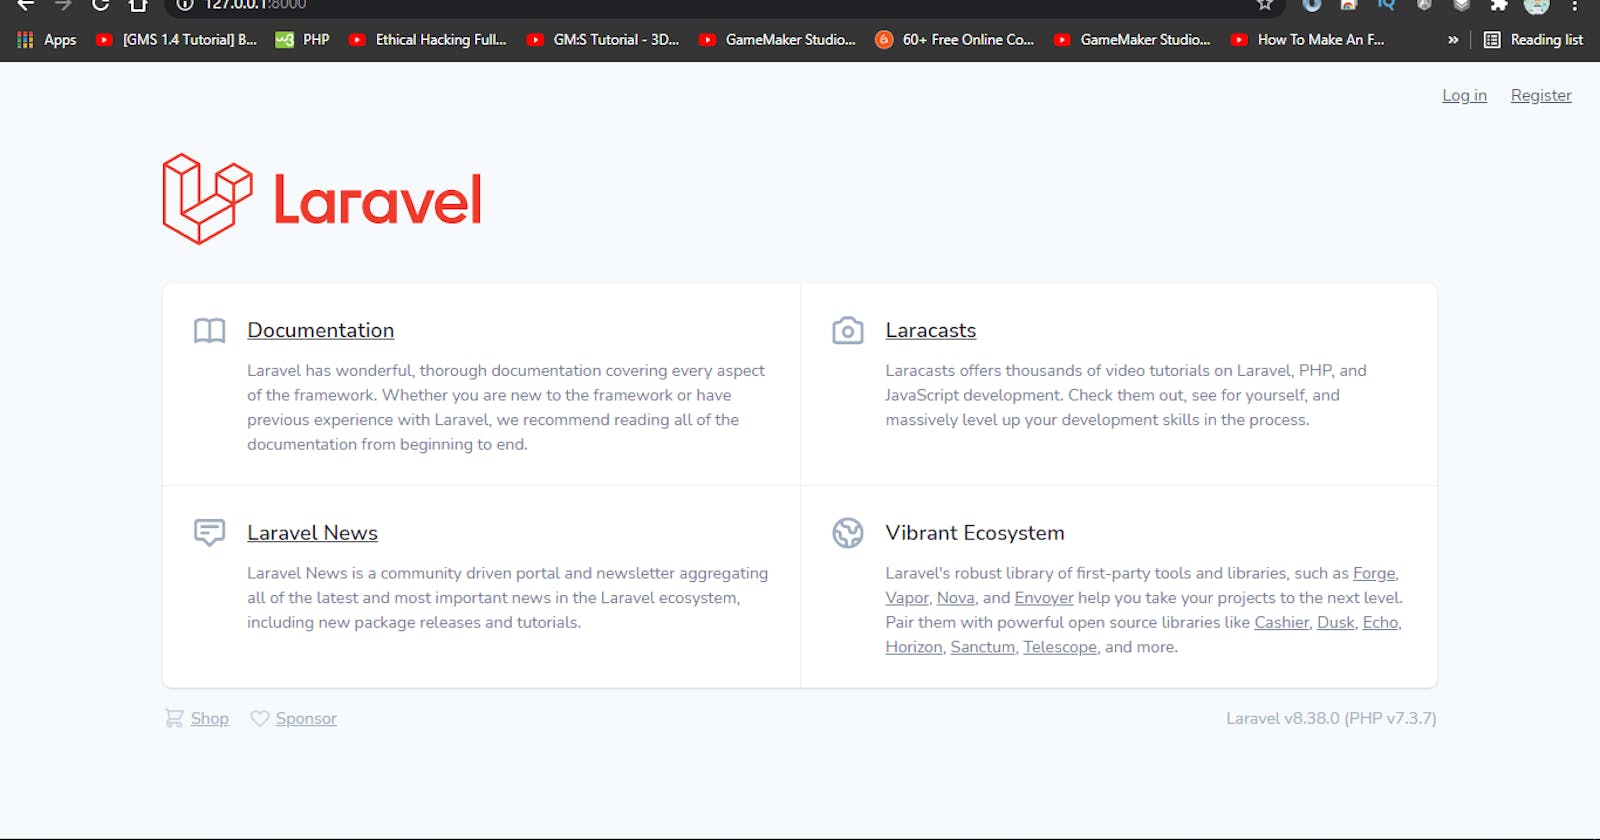 How To Build Real-Time Applications with Laravel & Livewire